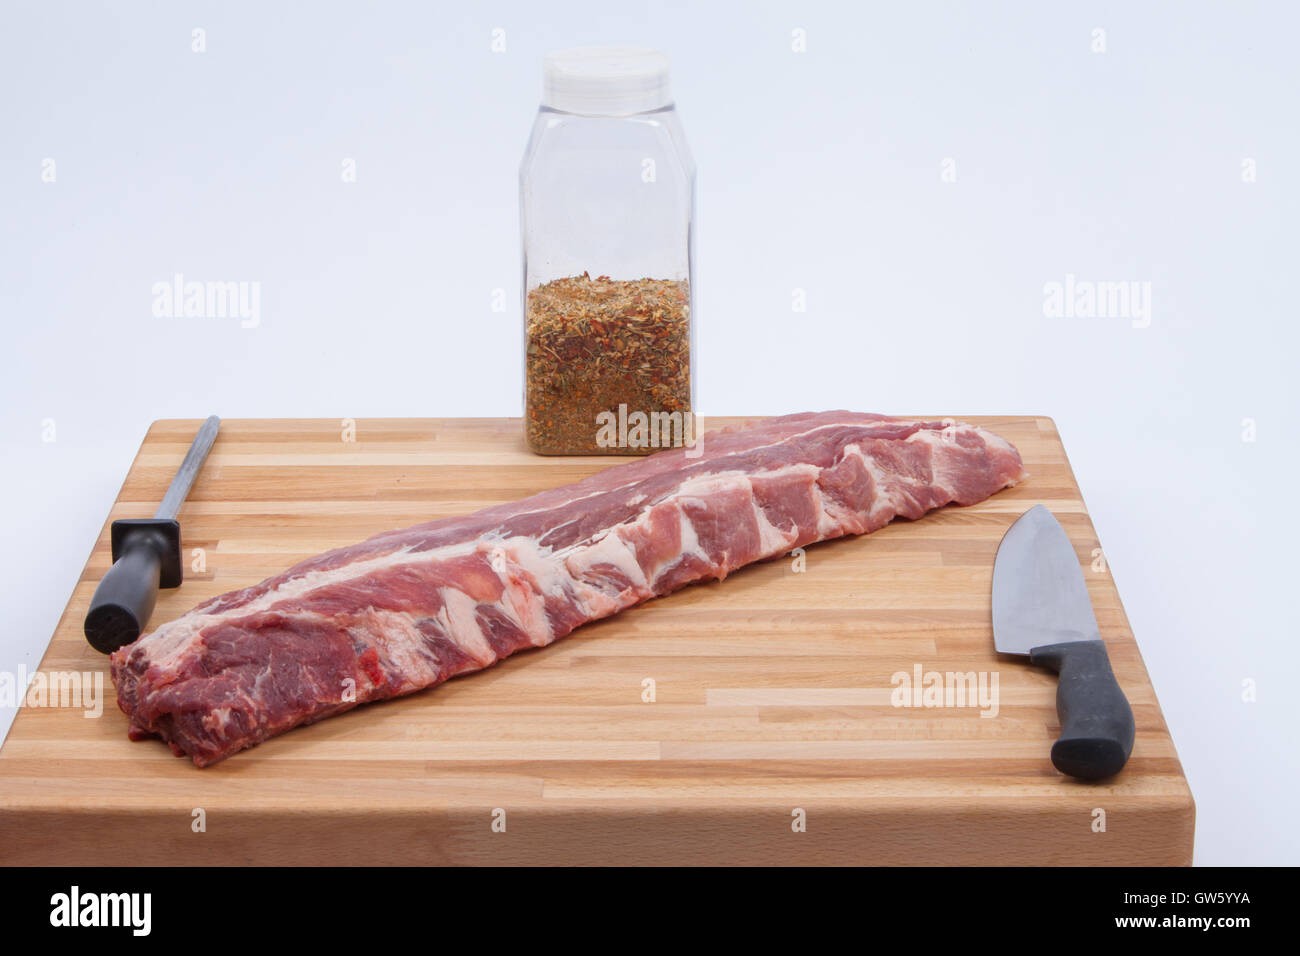 Raw, uncooked ,baby back ribs, board,  meat, pork dinner,brown,healthy, table, BBQ Stock Photo